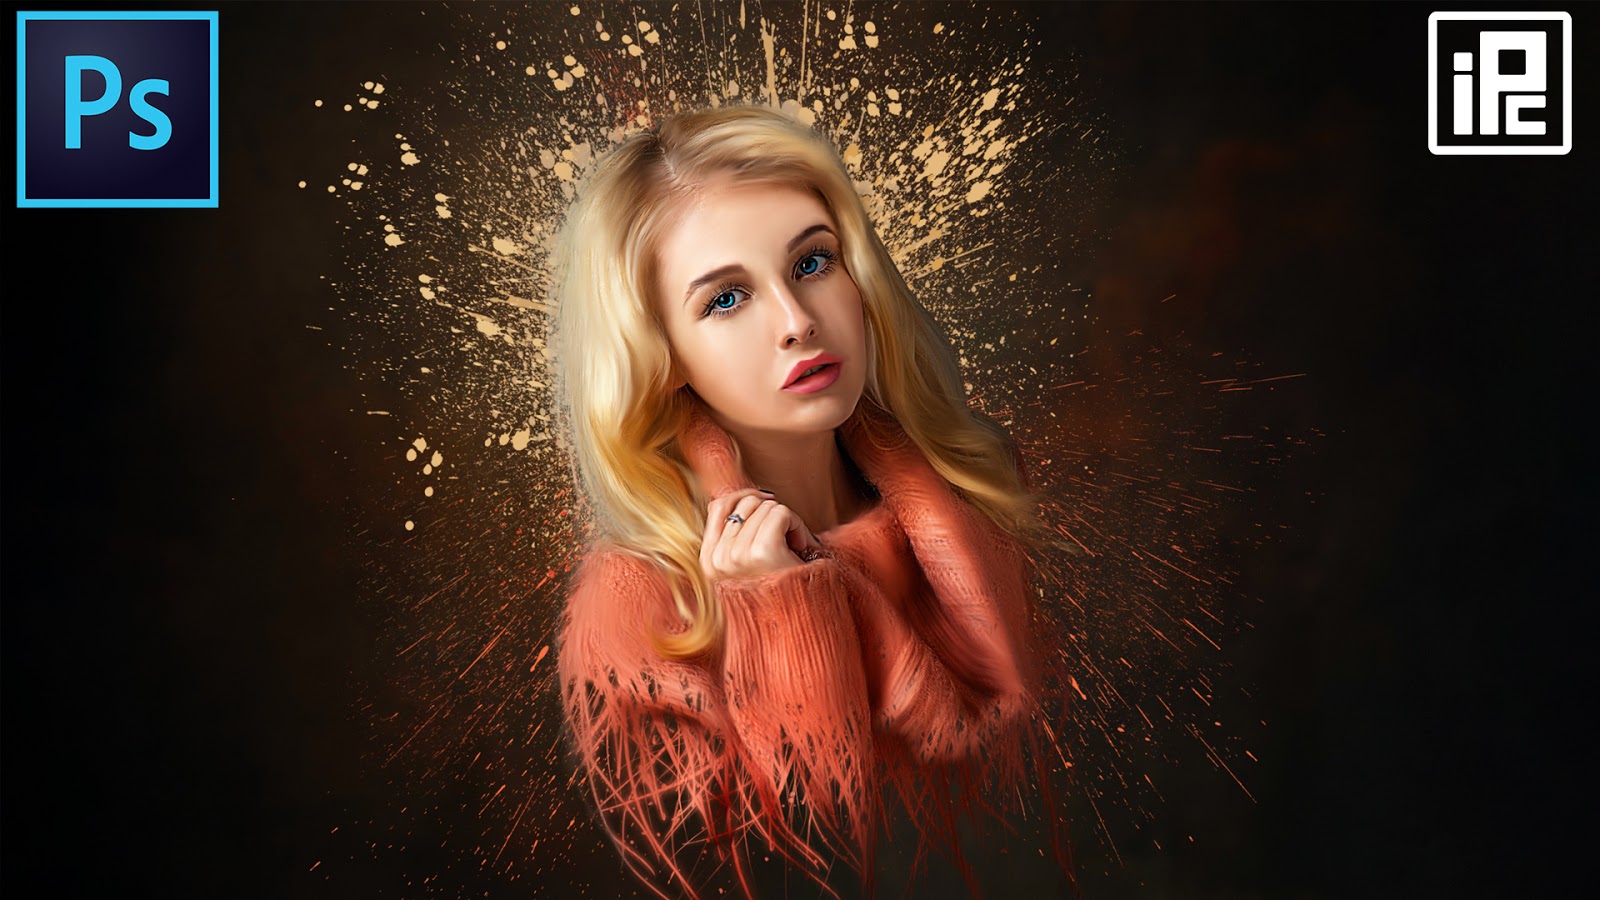 how to create smudge painting dispersion effect in Photoshop, photoshop smudge painting effect, how to create smudge painting effect, smudge painting effect in phtoshop,illphocorphics, illphocorphics tutorial,